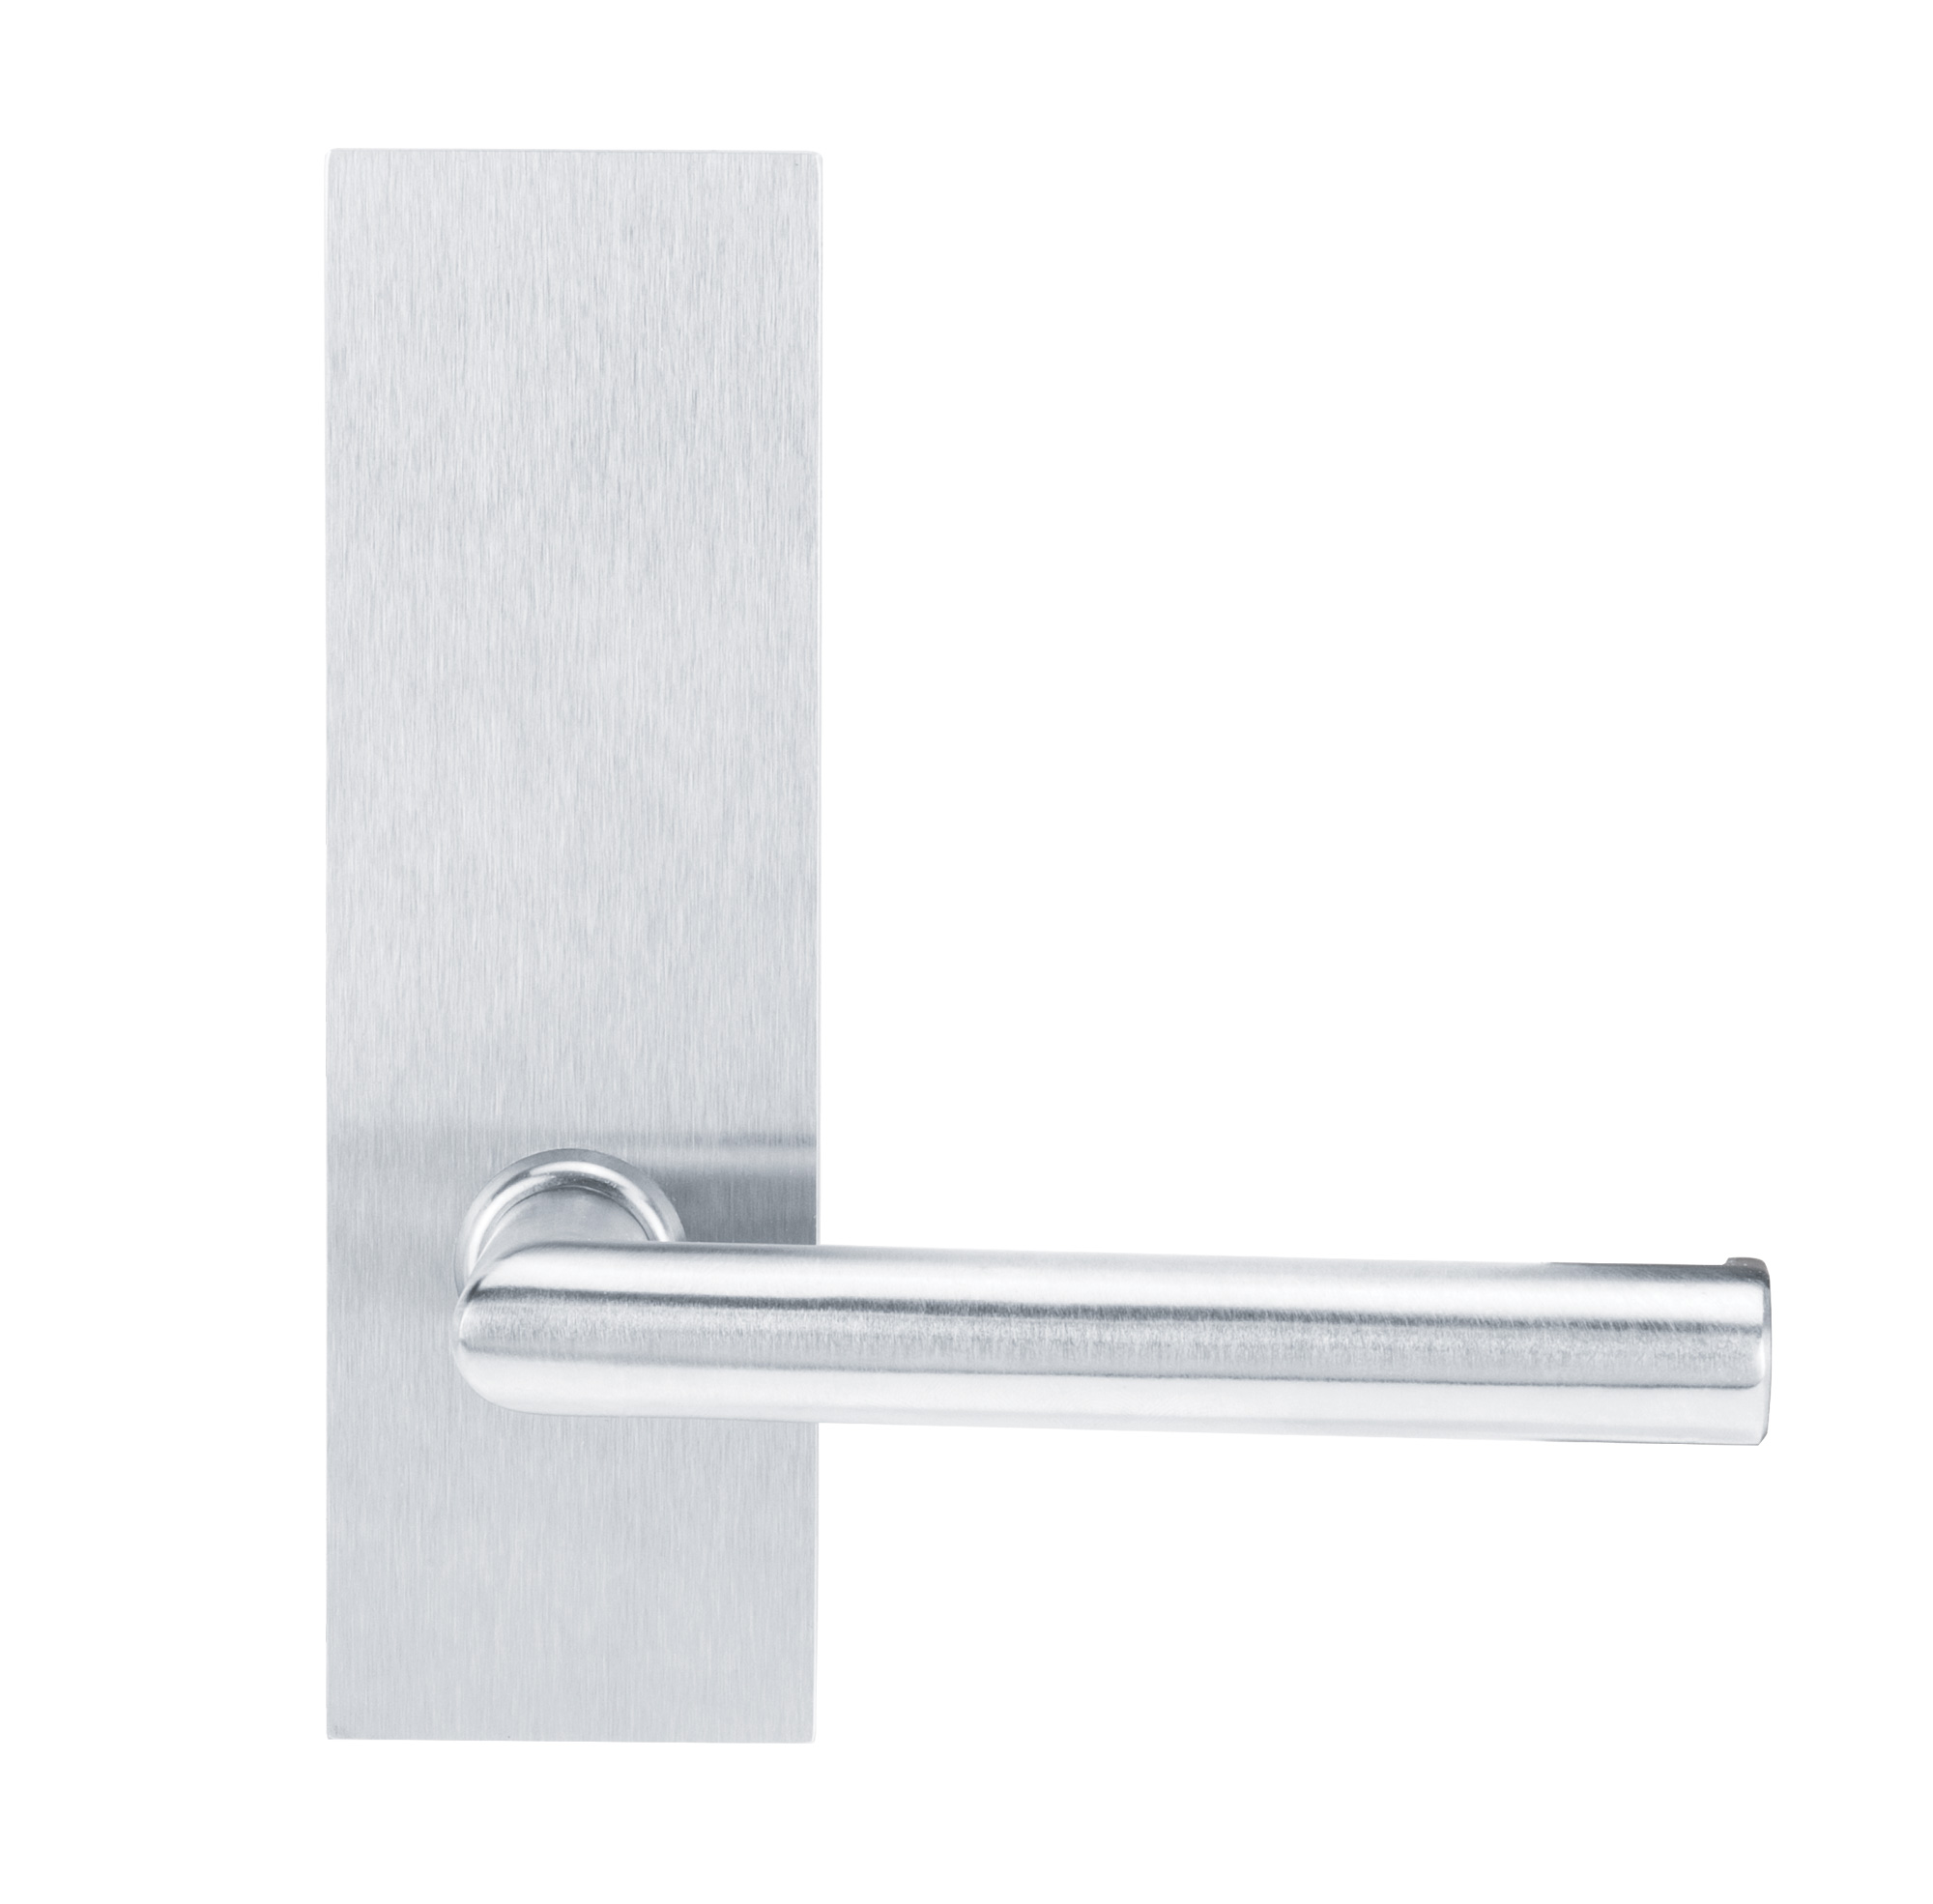 LOCKWOOD ARTEFACT 224 SERIES EXTERIOR PLATE 22405HH/96SS STAINLESS STEEL FOR DOOR THICKNESS 35-45 (MM) SUIT 3770/3570 SERIES MORTICE LOCK